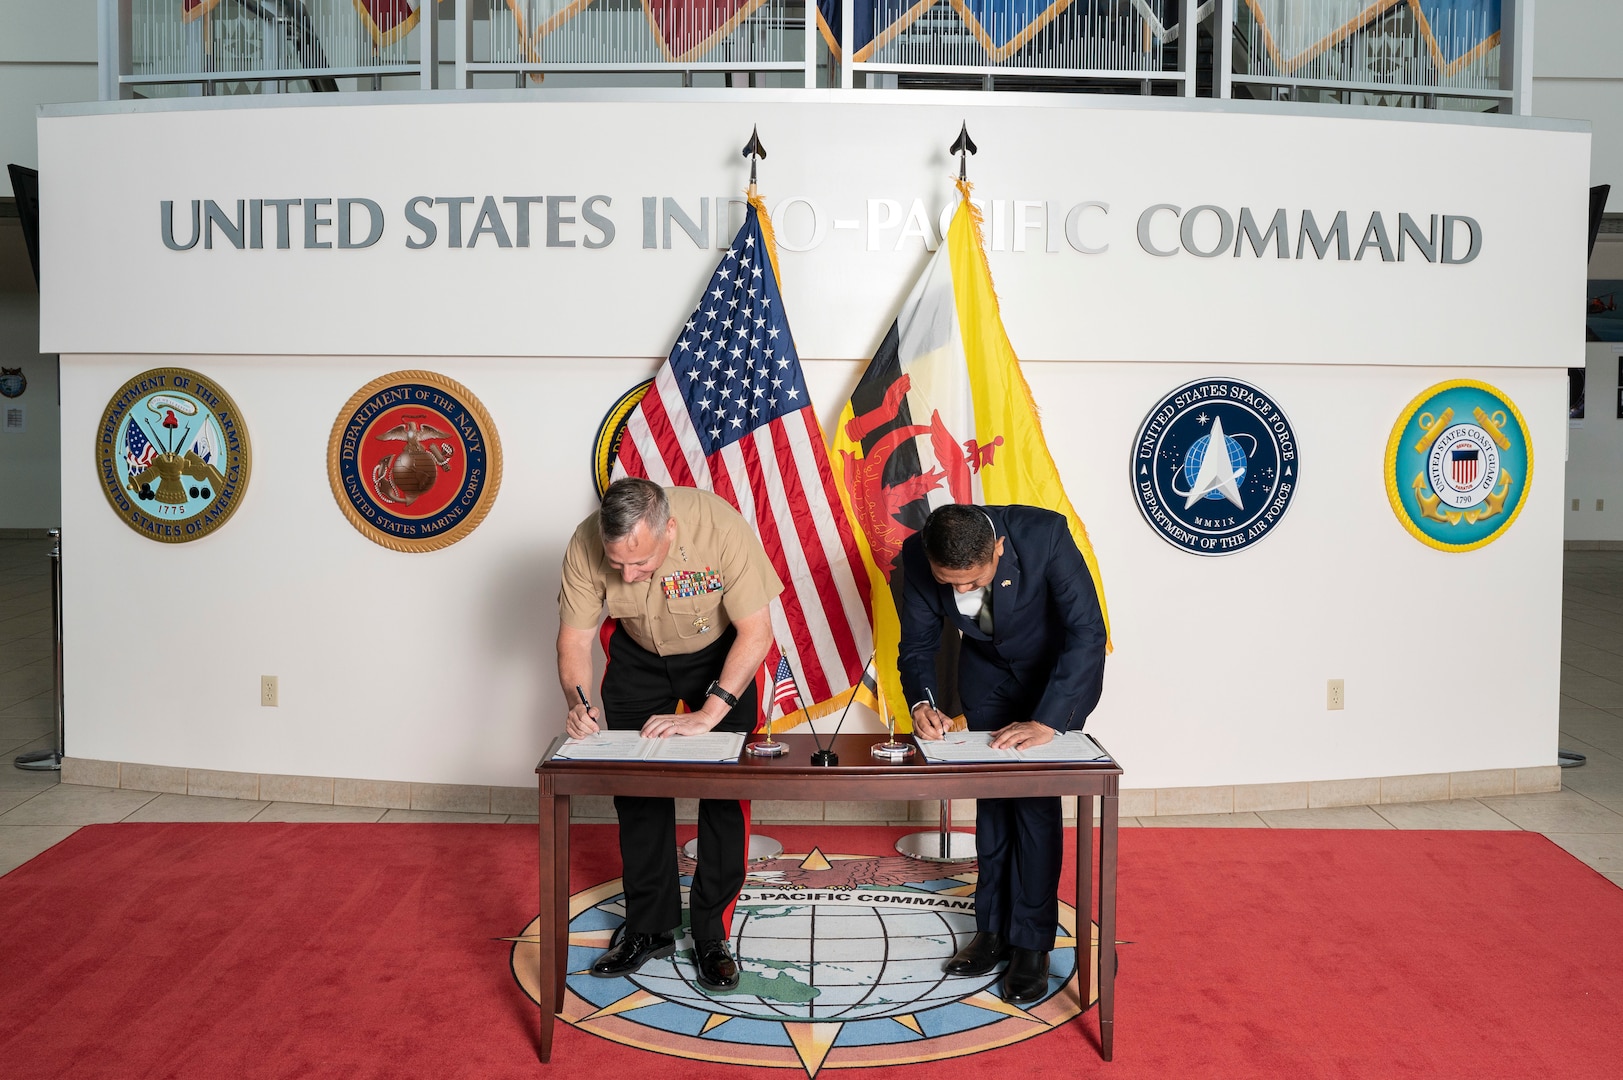 Lt. Gen. Stephen D. Sklenka, deputy commander, U.S. Indo-Pacific Command, hosted Dato Alirupendi, permanent secretary ministry of defense, State of Brunei Darussalam, at USINDOPACOM headquarters on Dec. 7, 2023, for the 16th joint defence working committee and the signing of the Section 505 Agreement. The bilateral engagement further builds upon the cooperation and interoperability between the two countries, codifies the exchange of diplomatic notes and assets, and demonstrates USINDOPACOM’s commitment to its Allies and partners to help ensure a free, open, and prosperous Indo-Pacific. (U.S. Army photo by Sgt. Austin Riel)